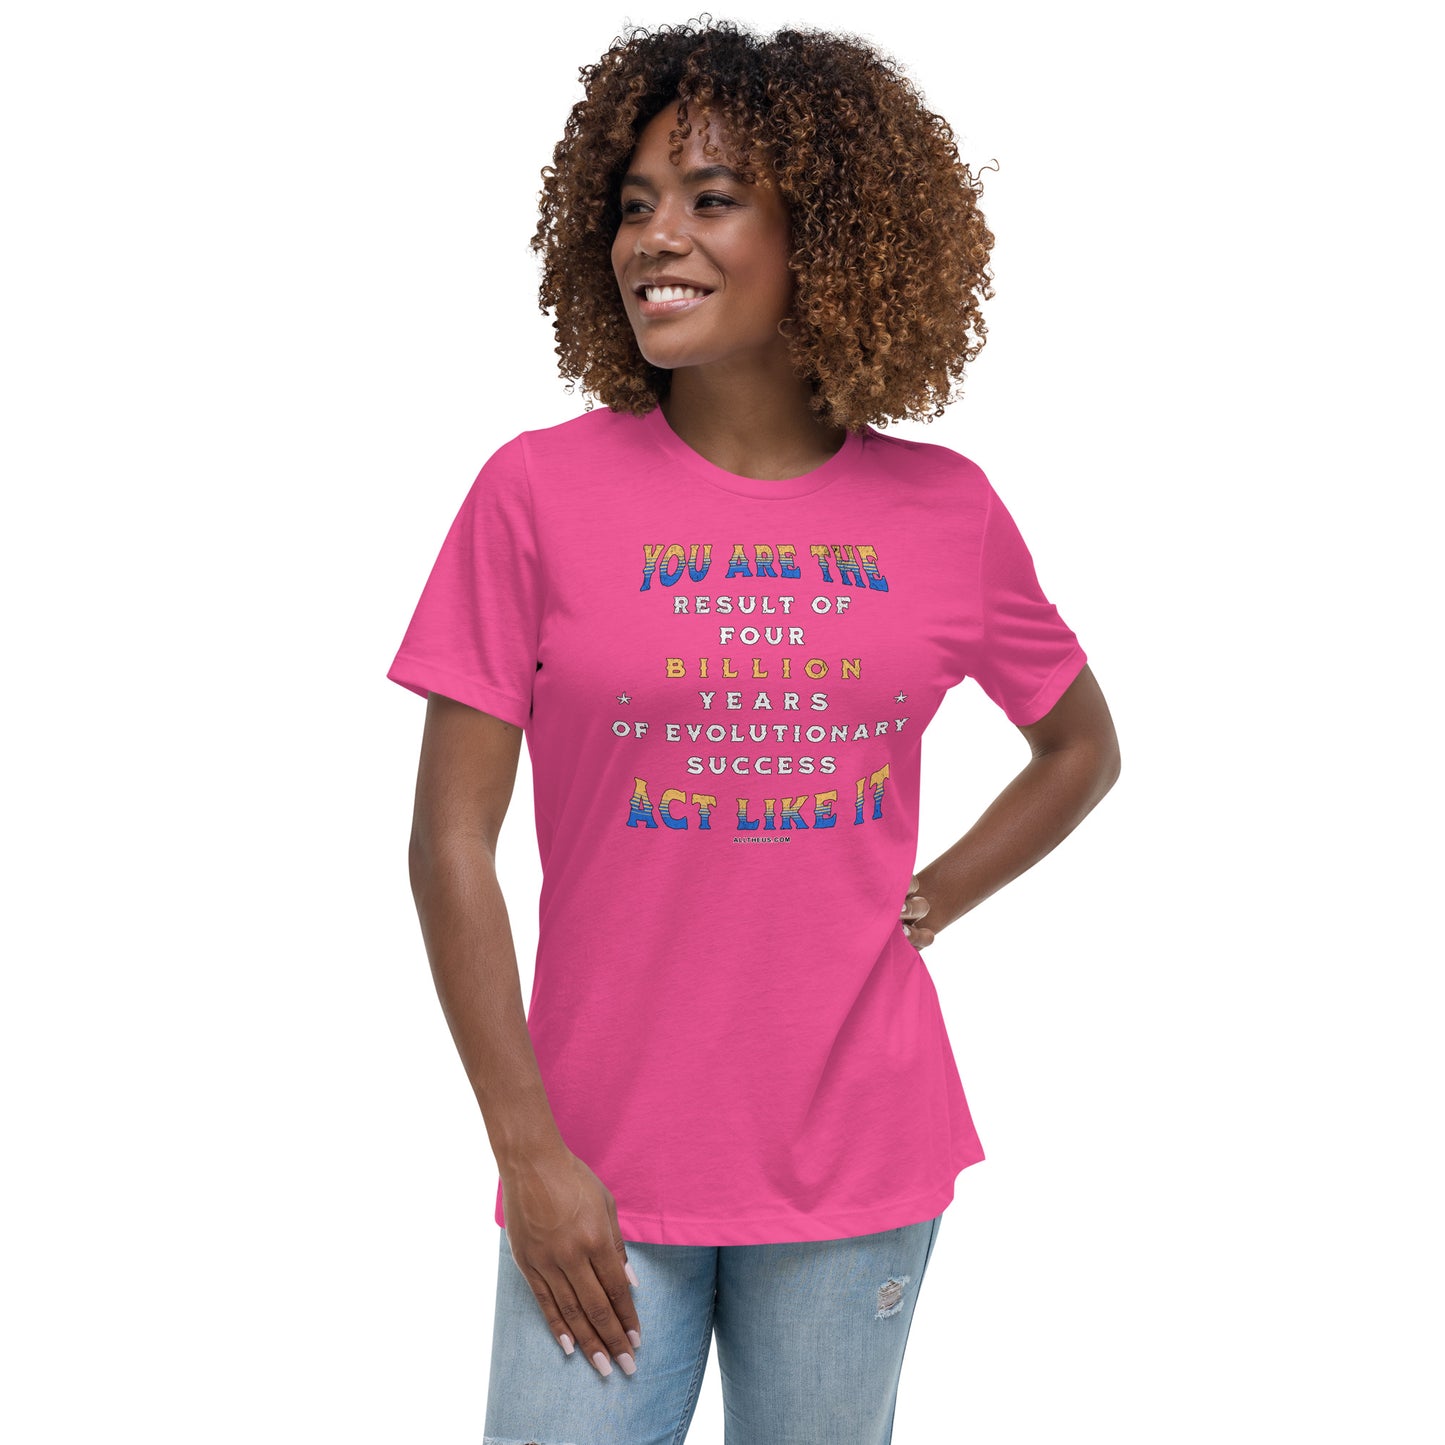 Women's Relaxed T-Shirt - You Are The Result of 4 Billion Years of Evolution